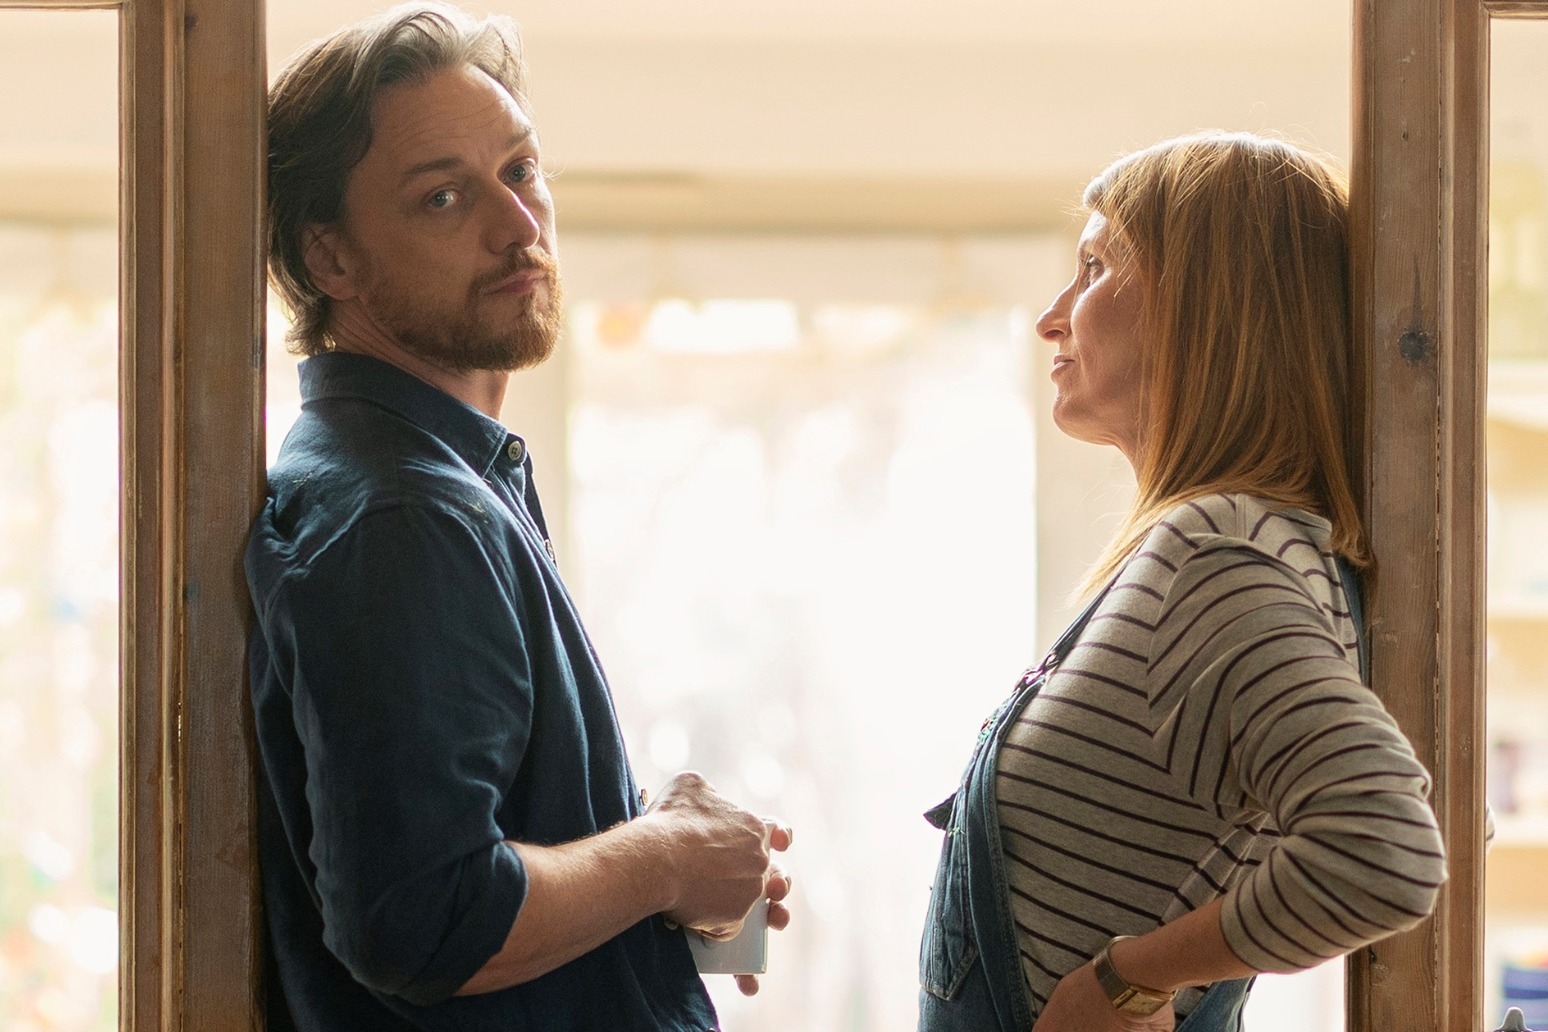 James McAvoy and Lawrence Chaney among winners at Bafta Scotland awards 